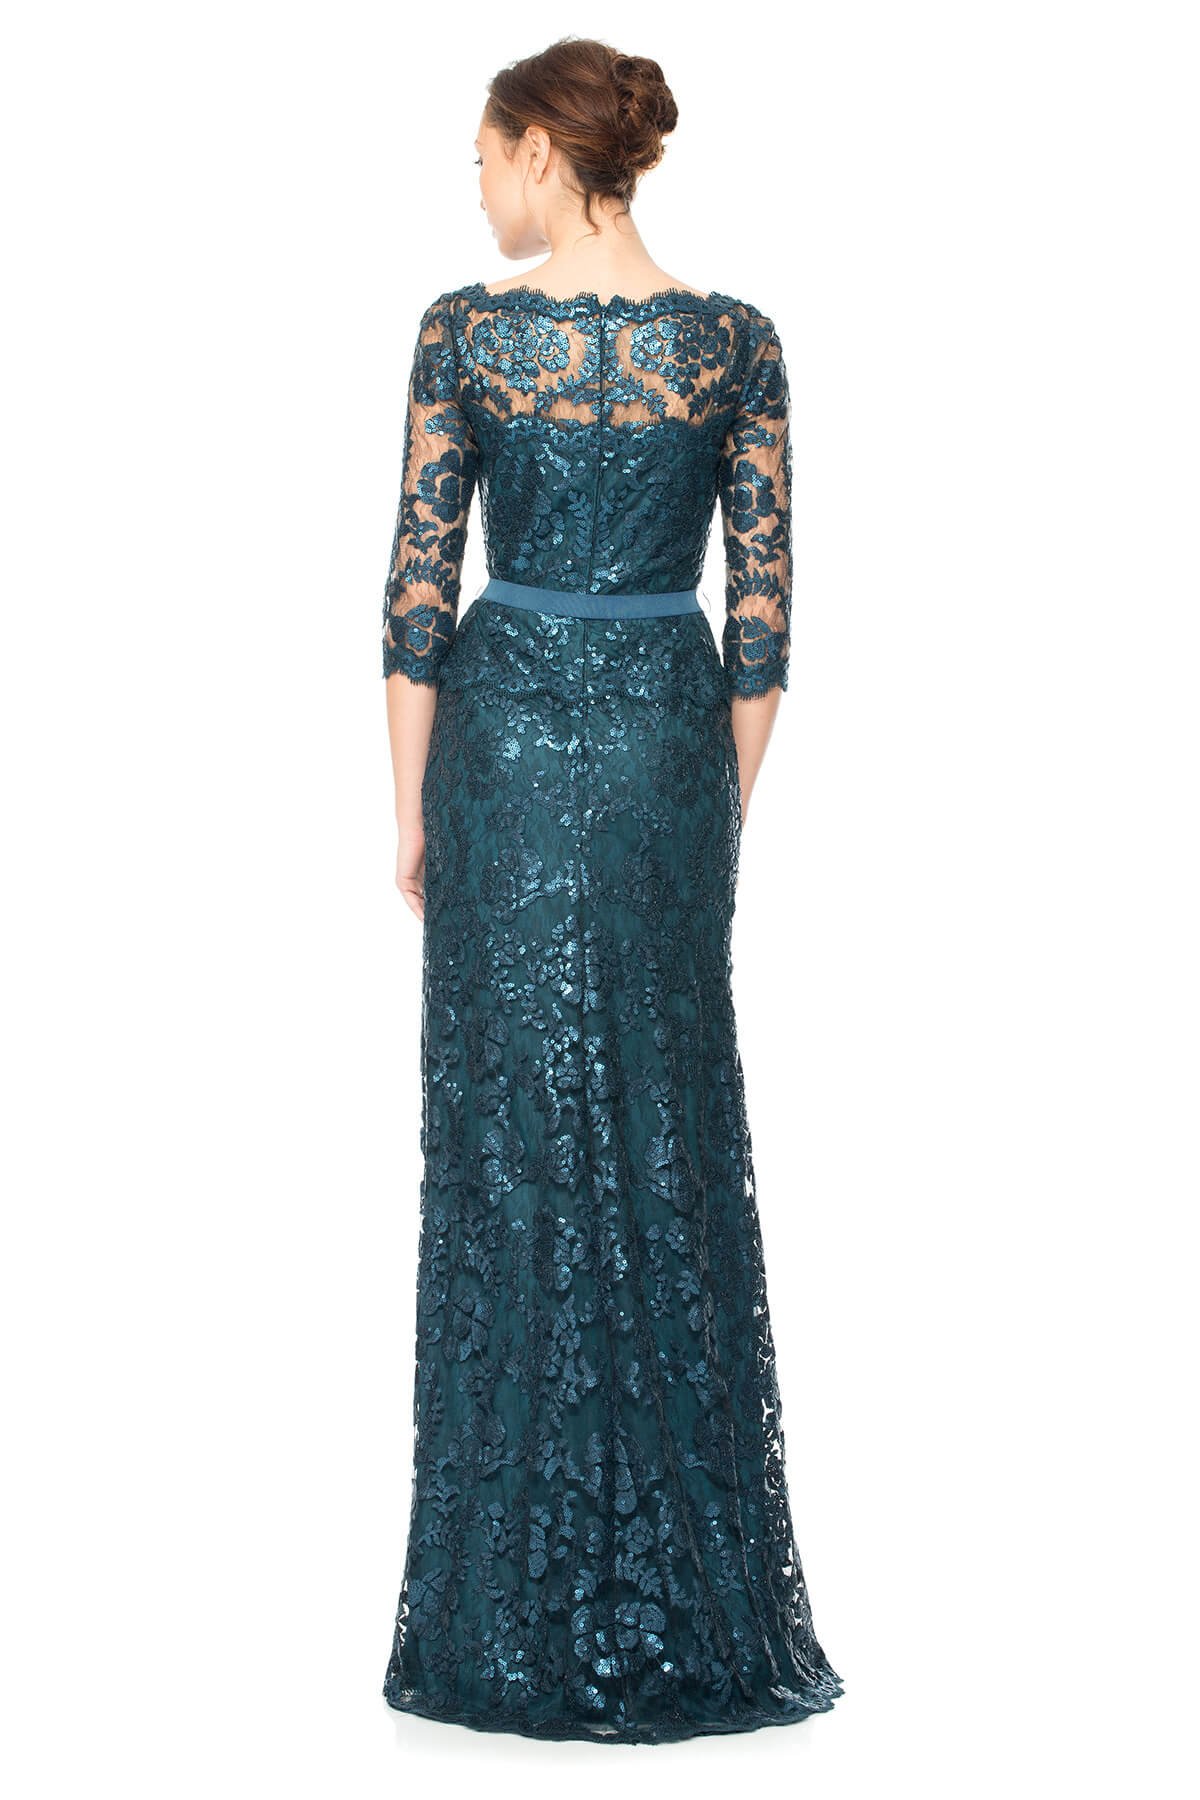 Tadashi Shoji Petite Size - Paillette Embroidered Lace 3/4 Sleeve Gown